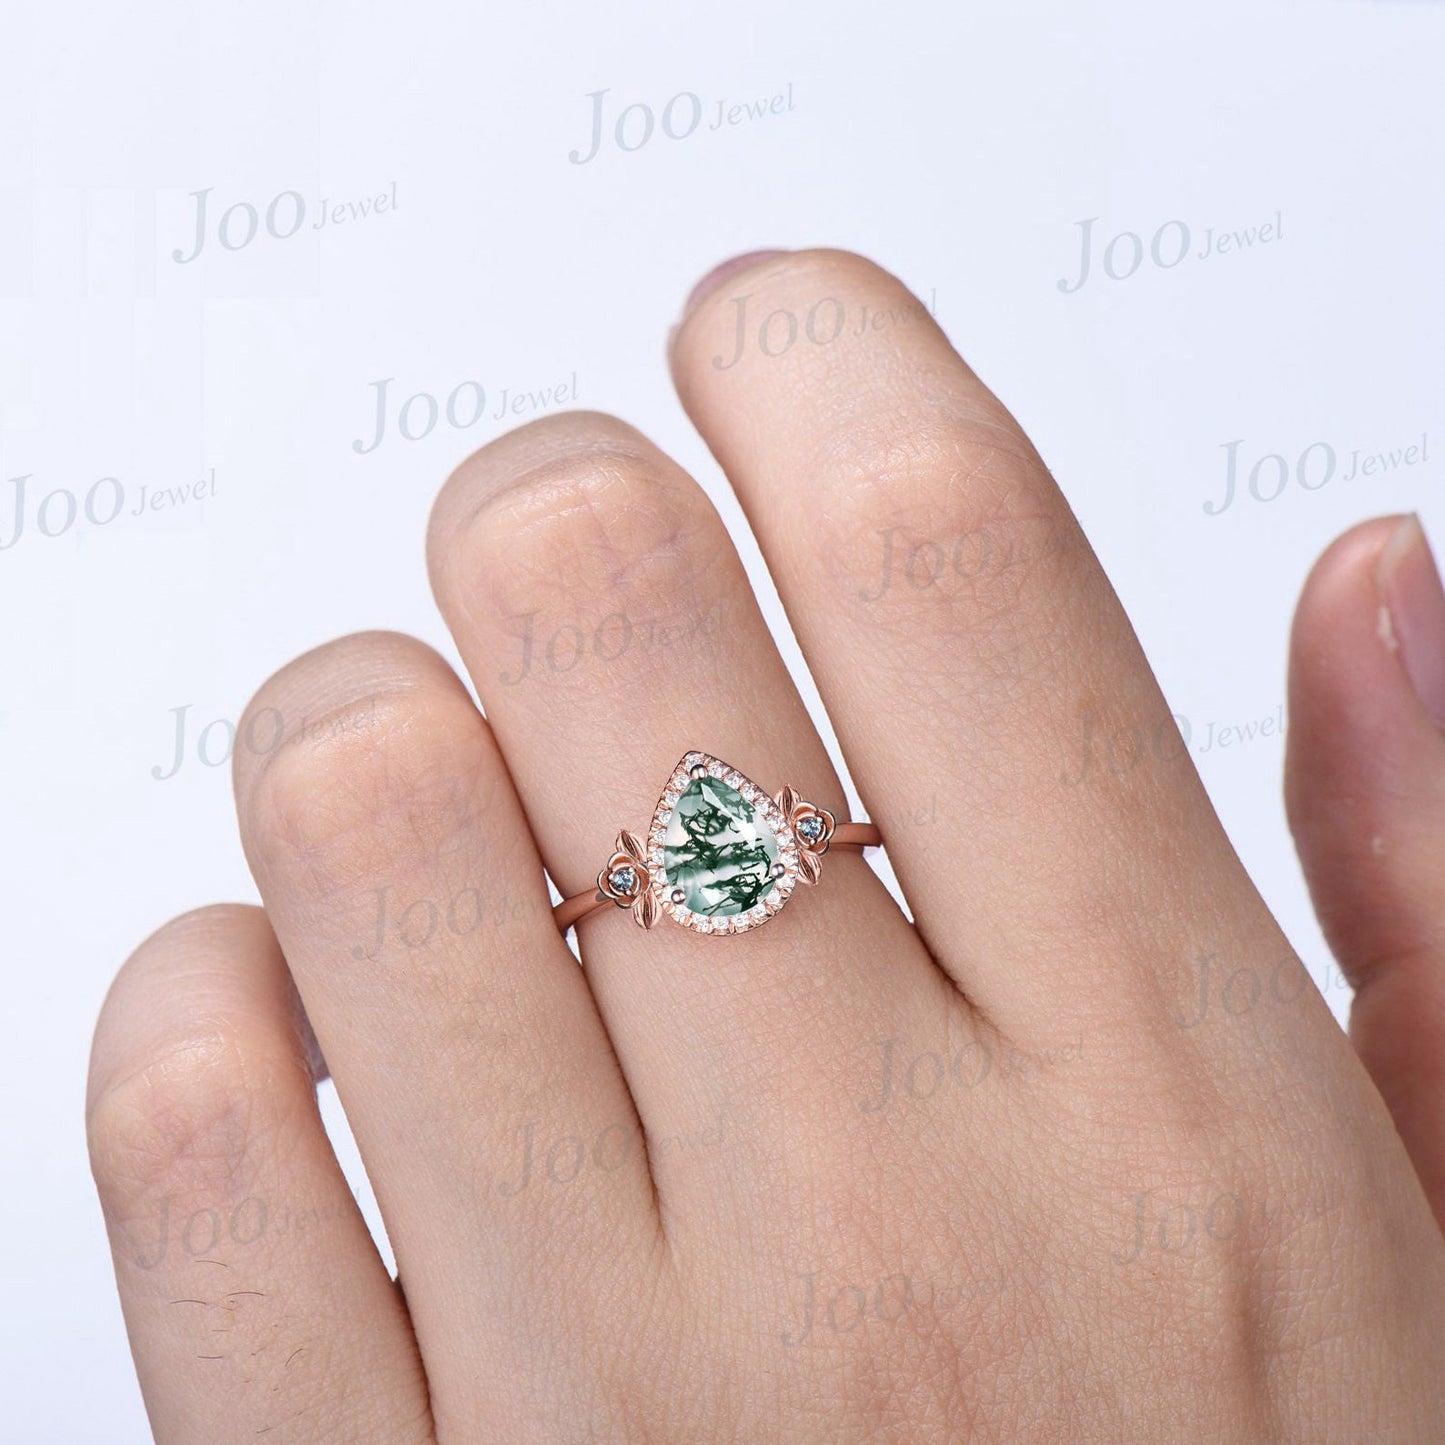 Pear Cut Moss Agate Engagement Ring Halo Wedding Ring 14K Rose Gold Leaf Flower Cluster Moissanite Alexandrite Ring Unique Anniversary Gifts